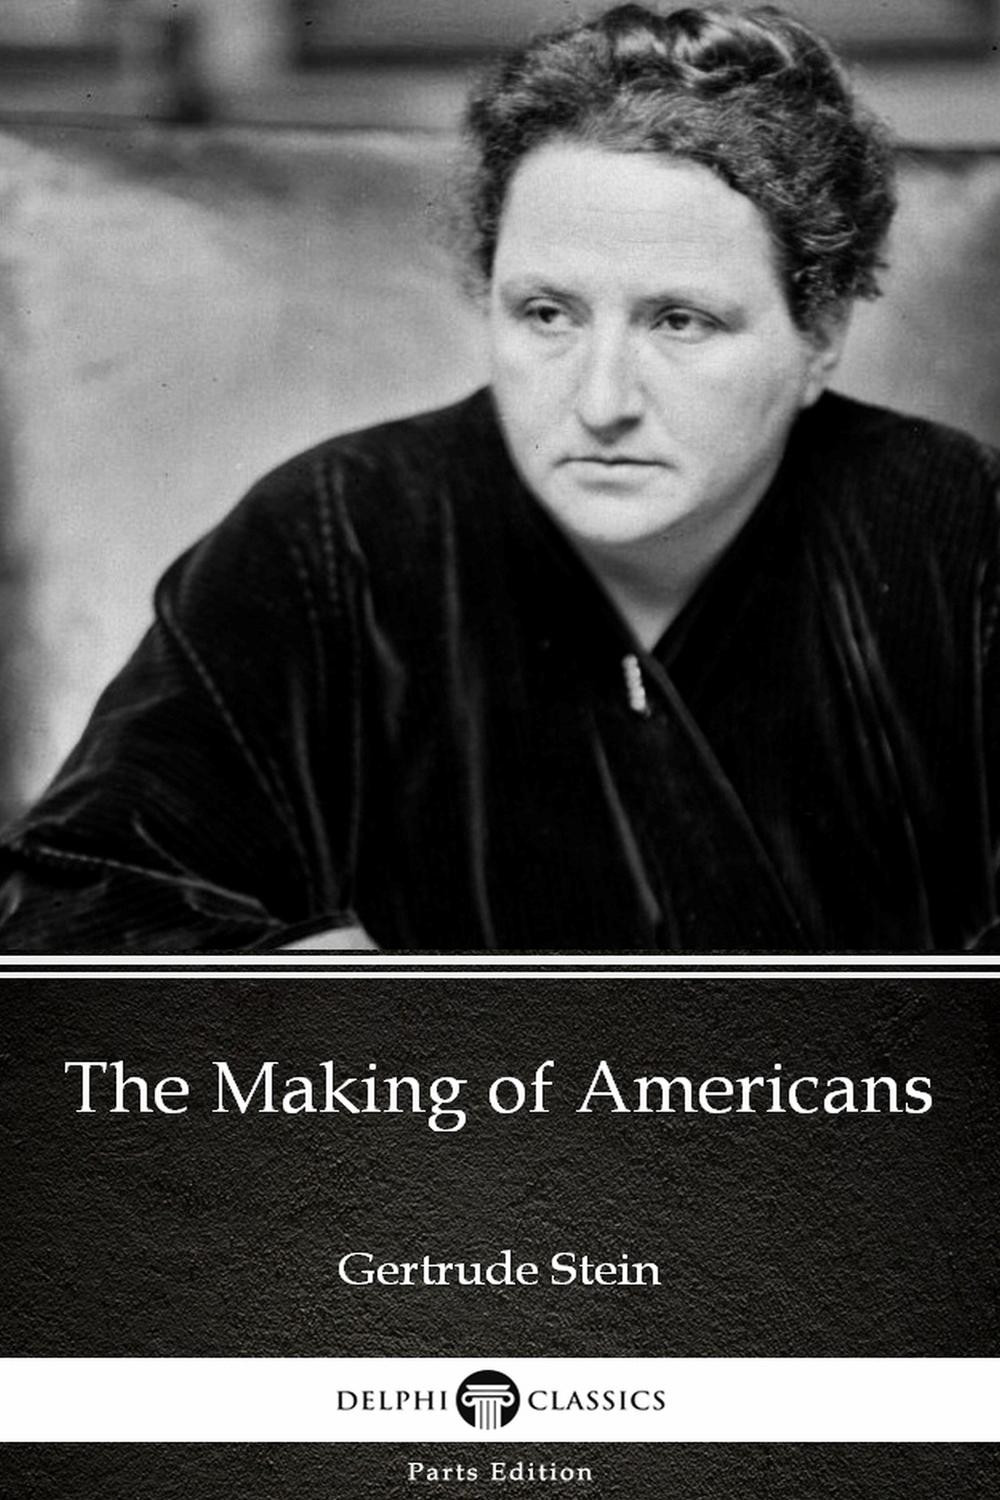 The Making of Americans by Gertrude Stein - Delphi Classics (Illustrated) - Gertrude Stein, Delphi Classics